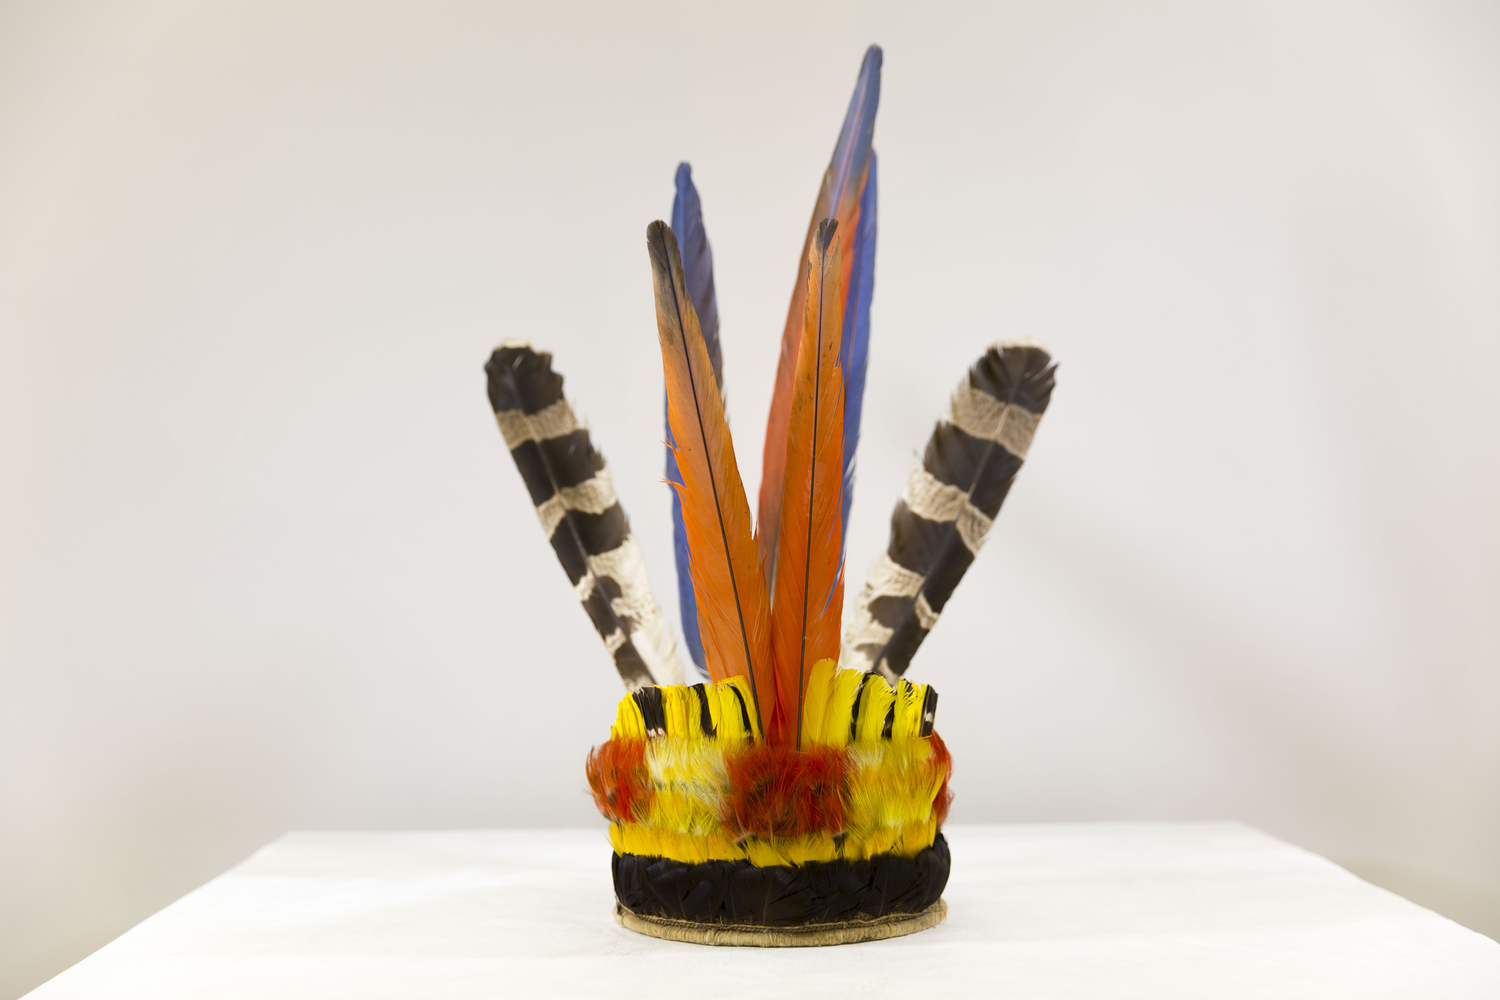 A crown woven with fiber and colorful feathers in red, orange and blue